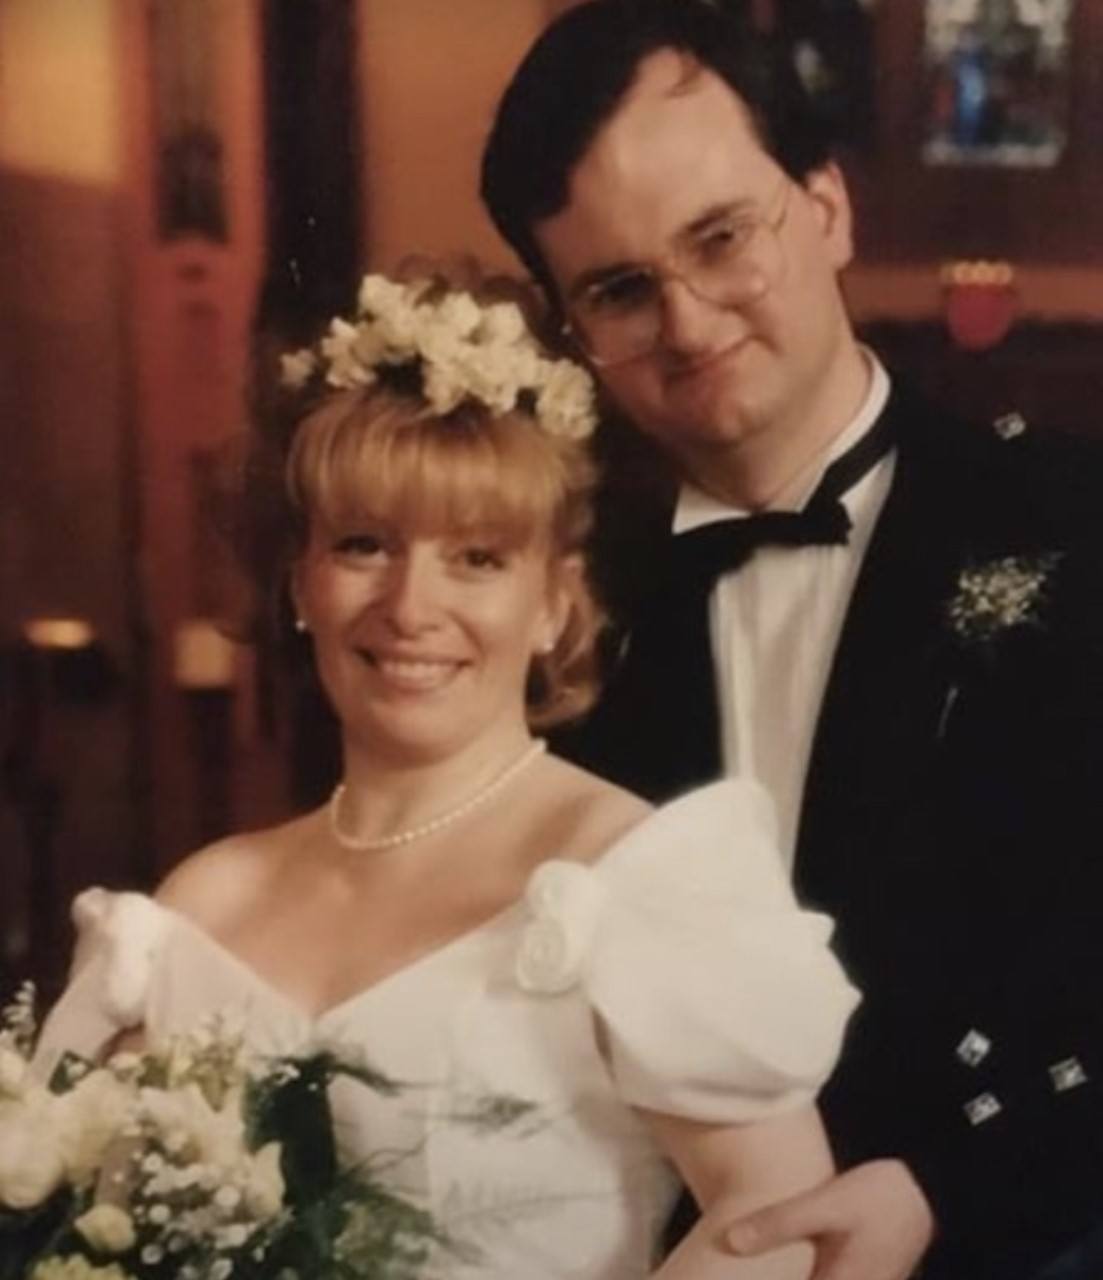 Stuart and Jane on their wedding day in 1995